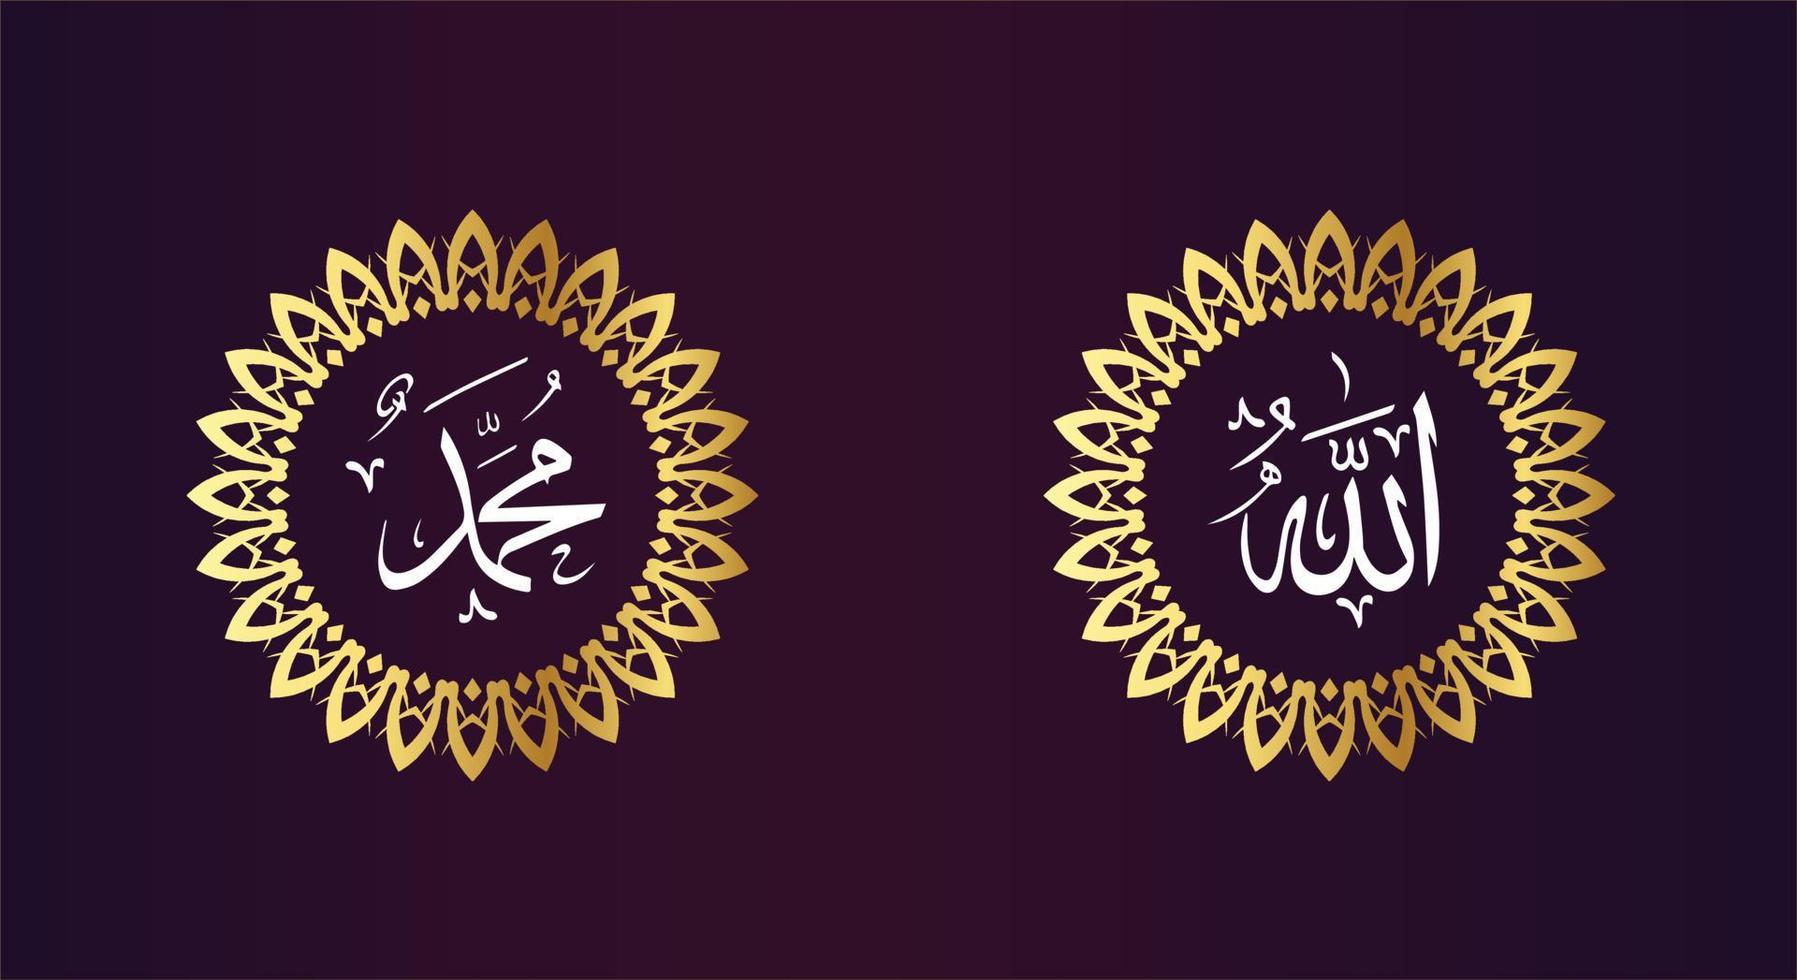 allah muhammad calligraphy with circle frame and gold color. isolated on gradient color vector